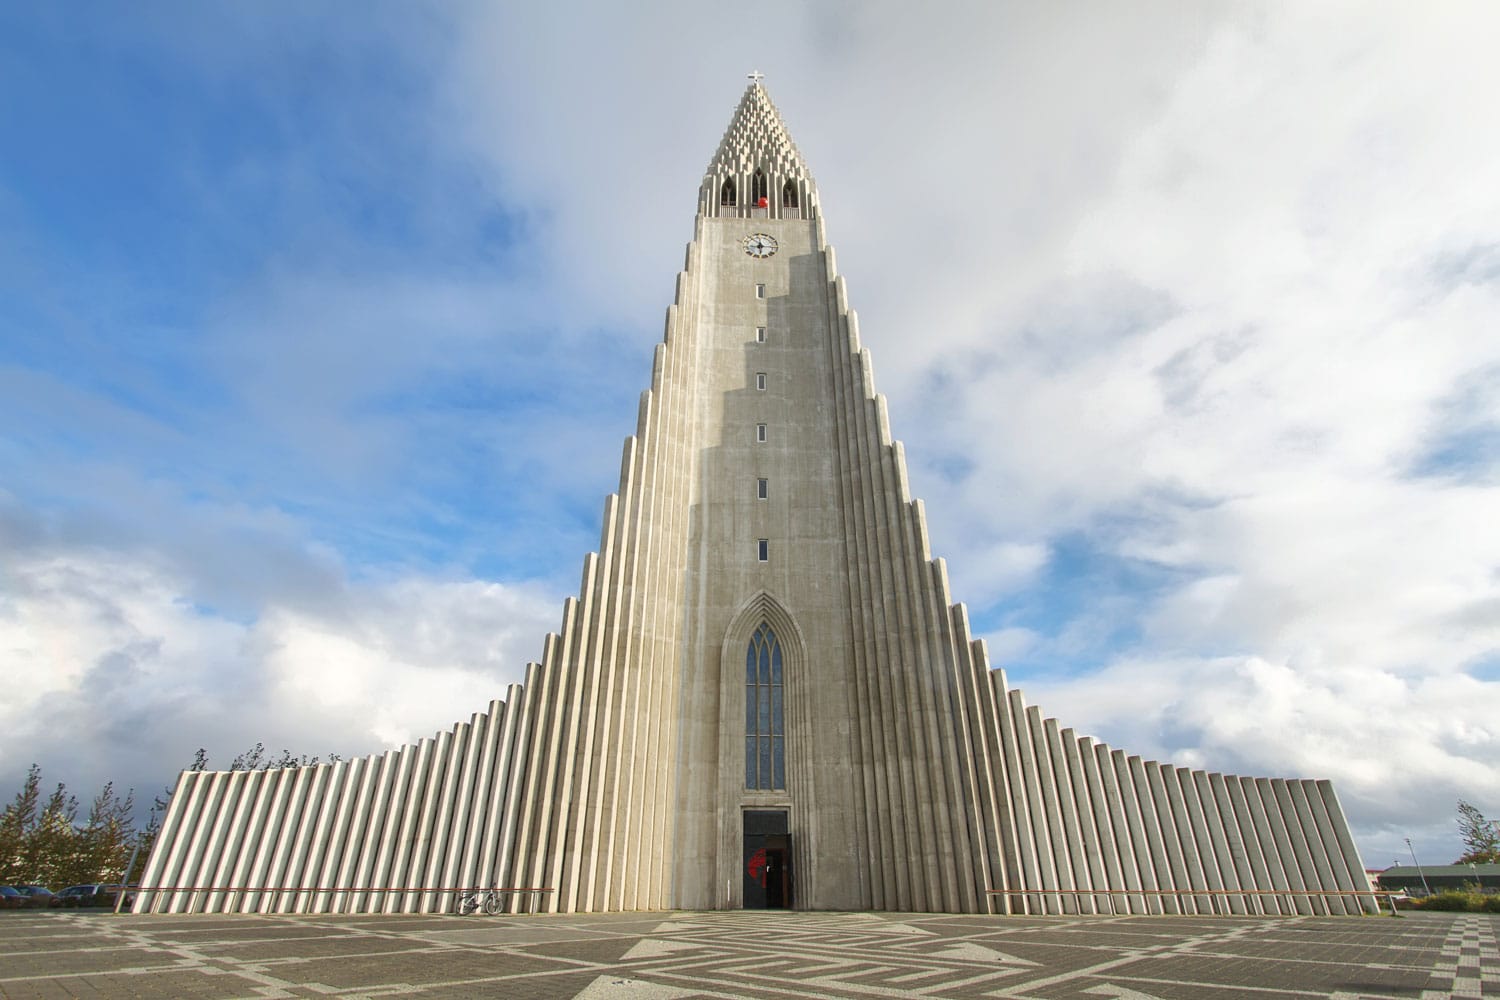 Hallgrimskirkja Cathedral in Reykjavik, Iceland. At 73 metres (244 ft), it is the largest church in Iceland.